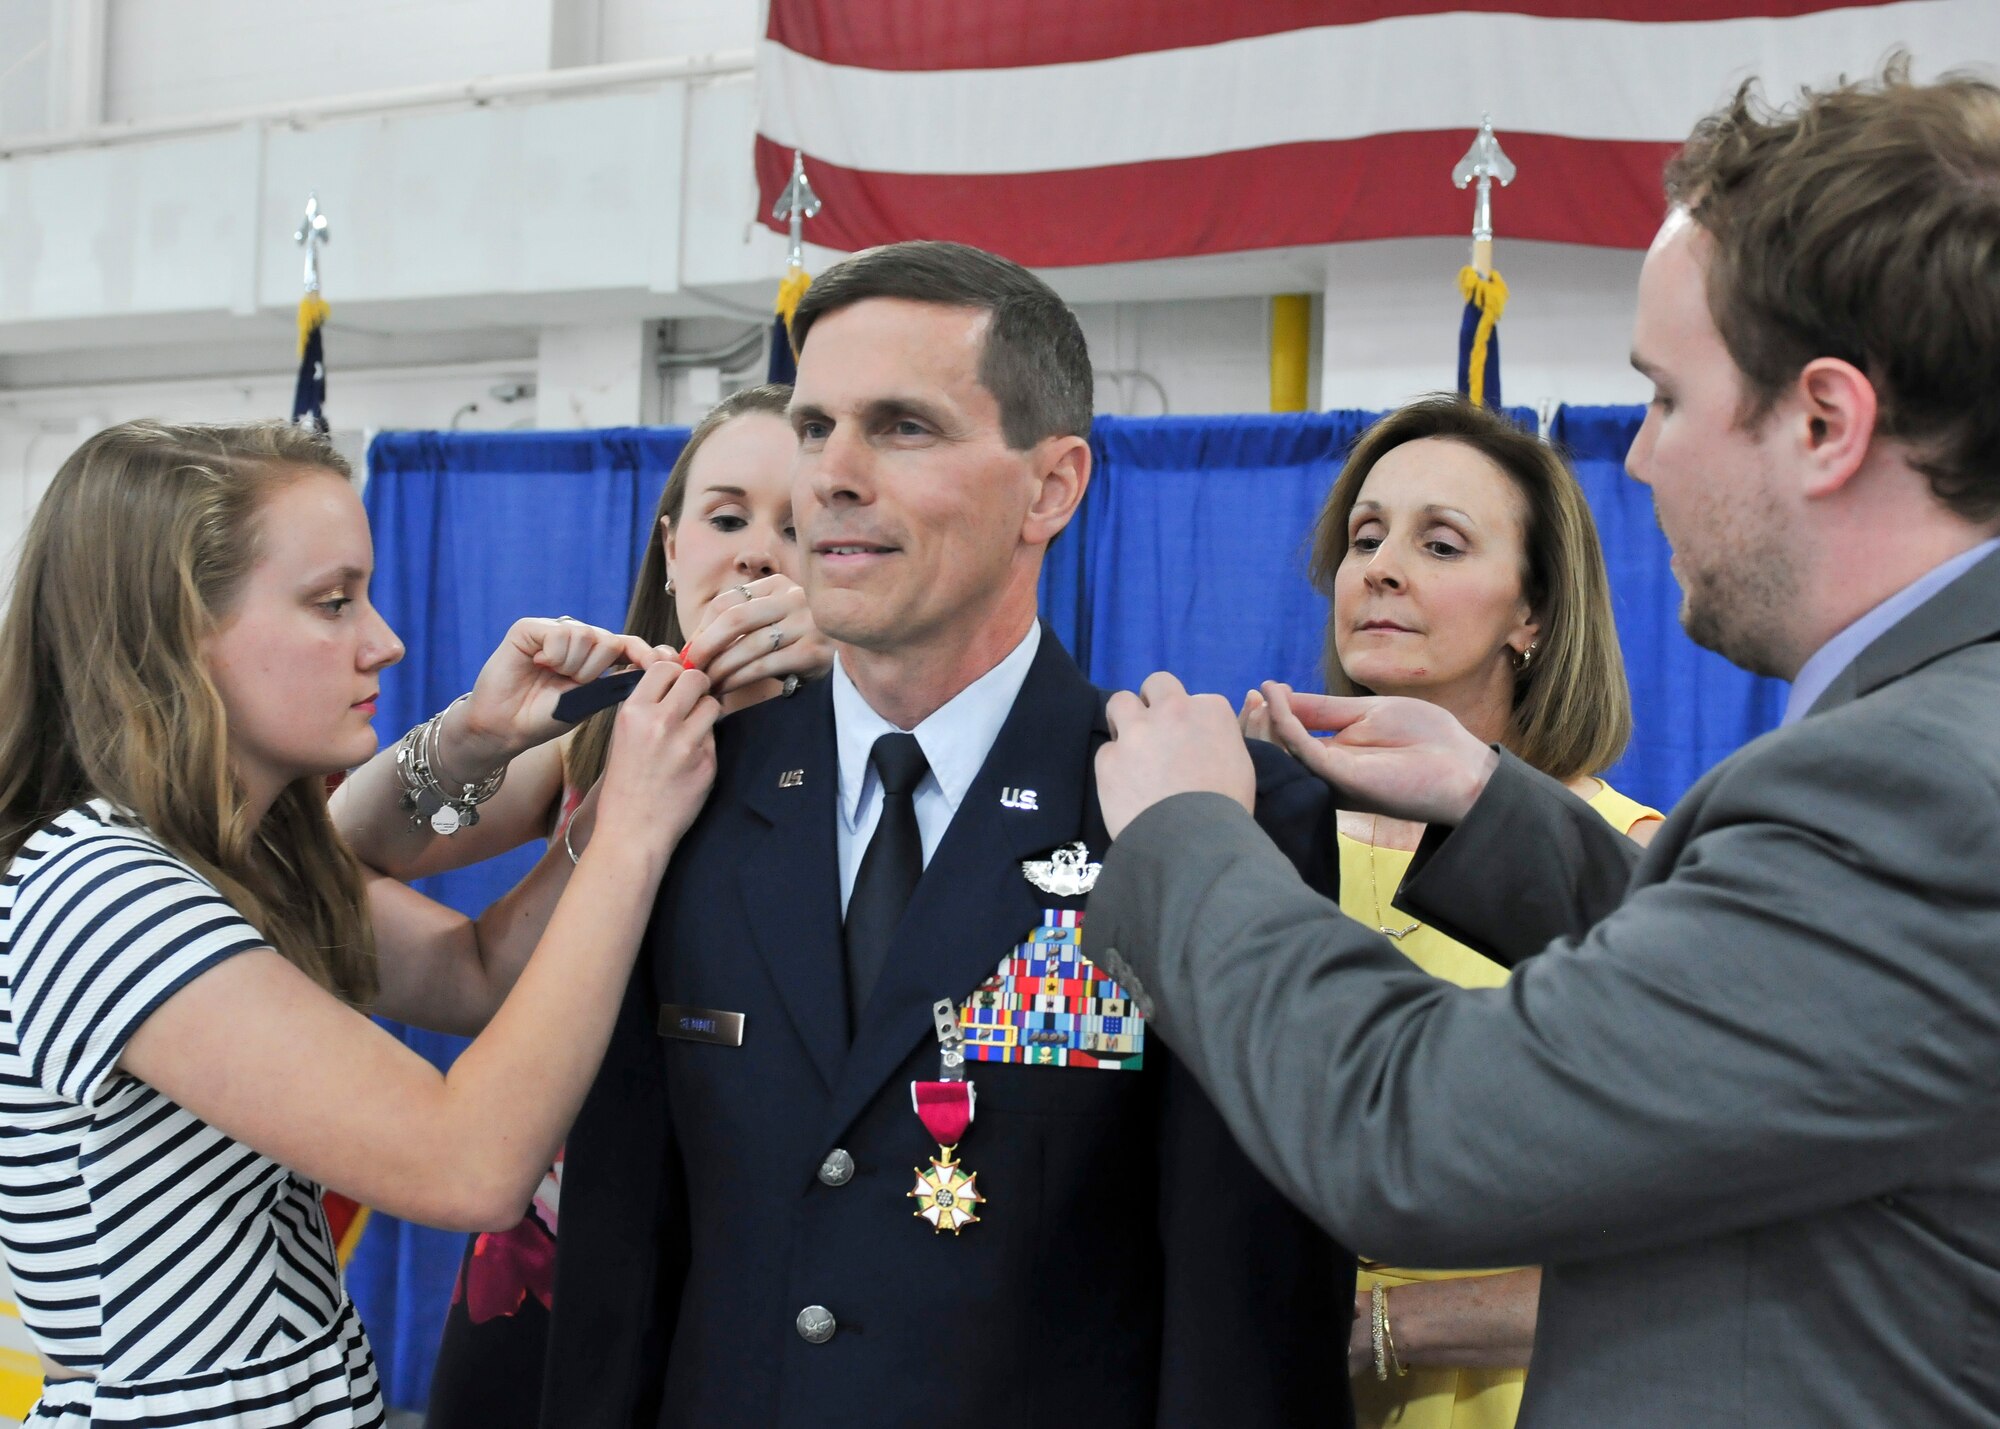 Former 174th Attack Wing Commander Col. Greg Semmel is pinned by his family, commemorating his promotion to brigadier general, during his promotion ceremony held on Hancock Field in Syracuse, NY Friday, June 10. Semmel will now serve as Assistant Adjutant General – Air for the New York Air National Guard. (U.S. Air National Guard photo by Tech. Sgt. Jeremy M. Call/Released)